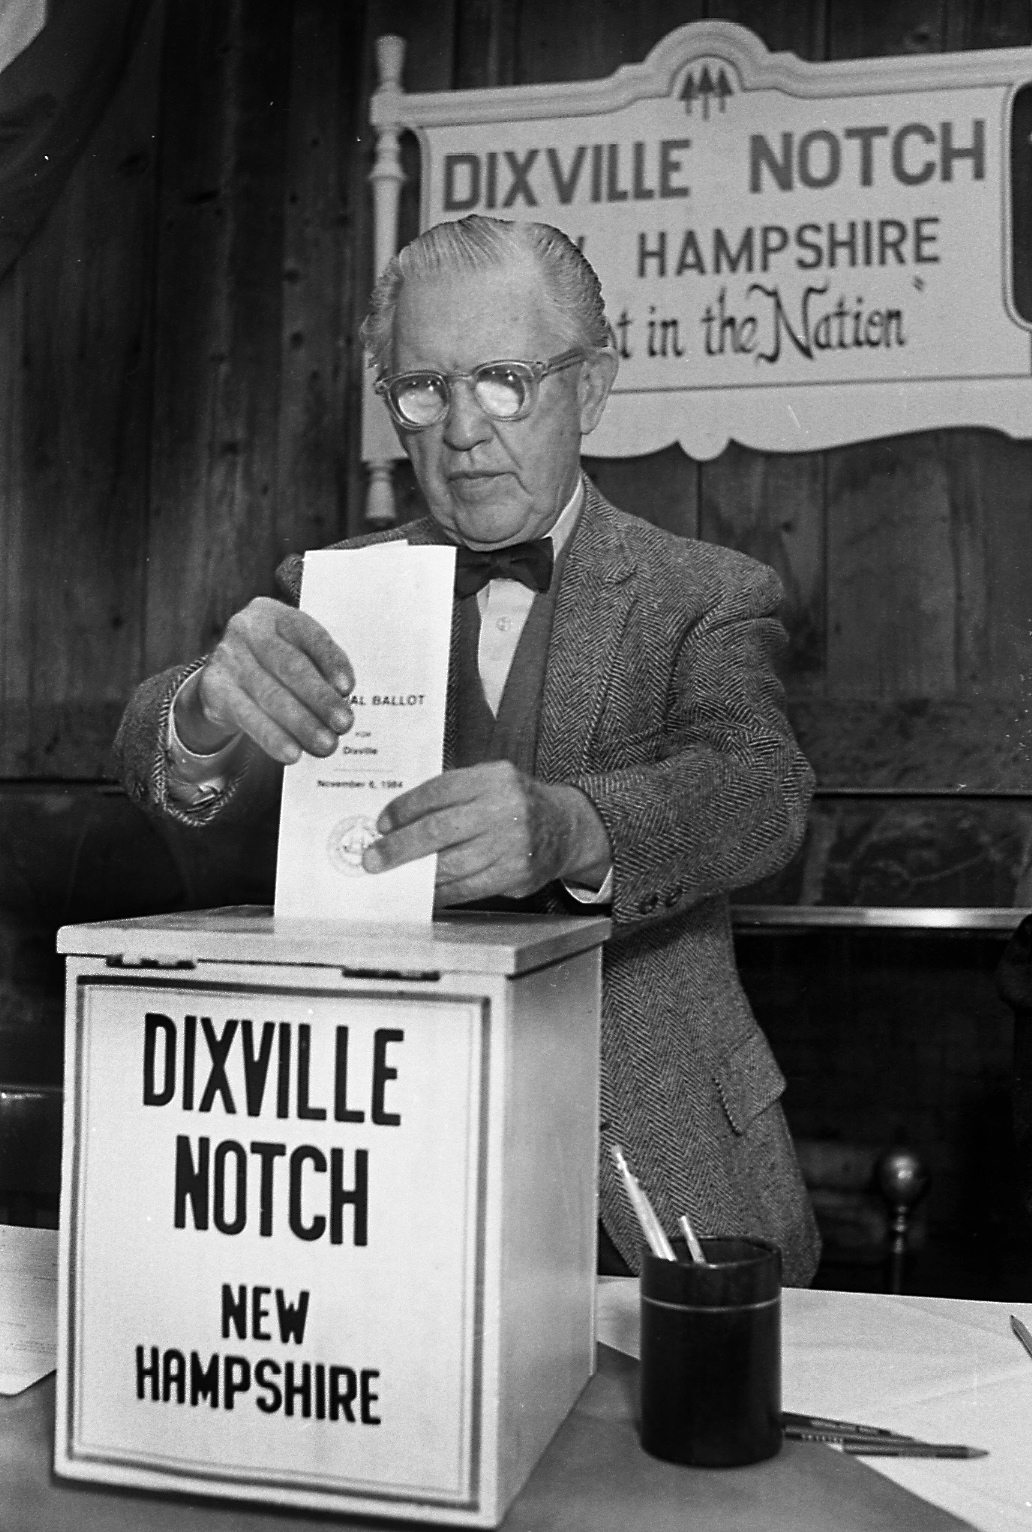 FILE - In this Feb. 28, 1984, file photo, Neil Tillotson gets ready to cast the first ballot in the New Hampshire presidential primary in Dixville, N.H. In Dixville, one of three tiny northern towns where voters cast ballots just after midnight Feb. 9, no one quite knows how the early voting tradition started. But most agree it had something to do with rival news photographers wanting to report first.